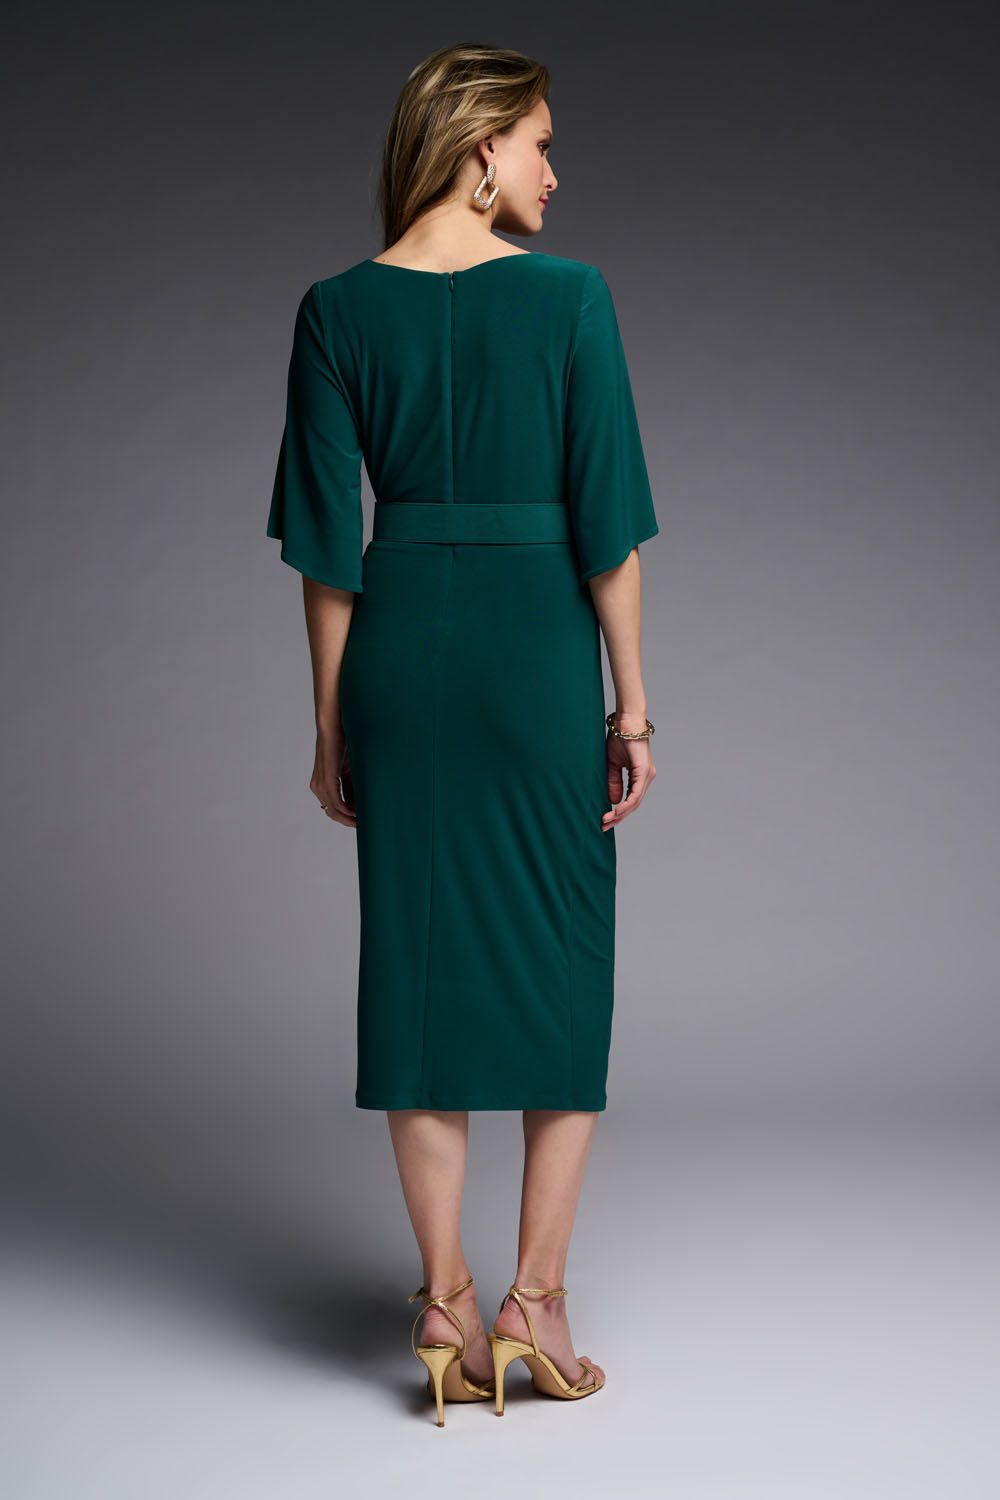 Drape Neck Ruched Dress With Jewel Belt Buckle